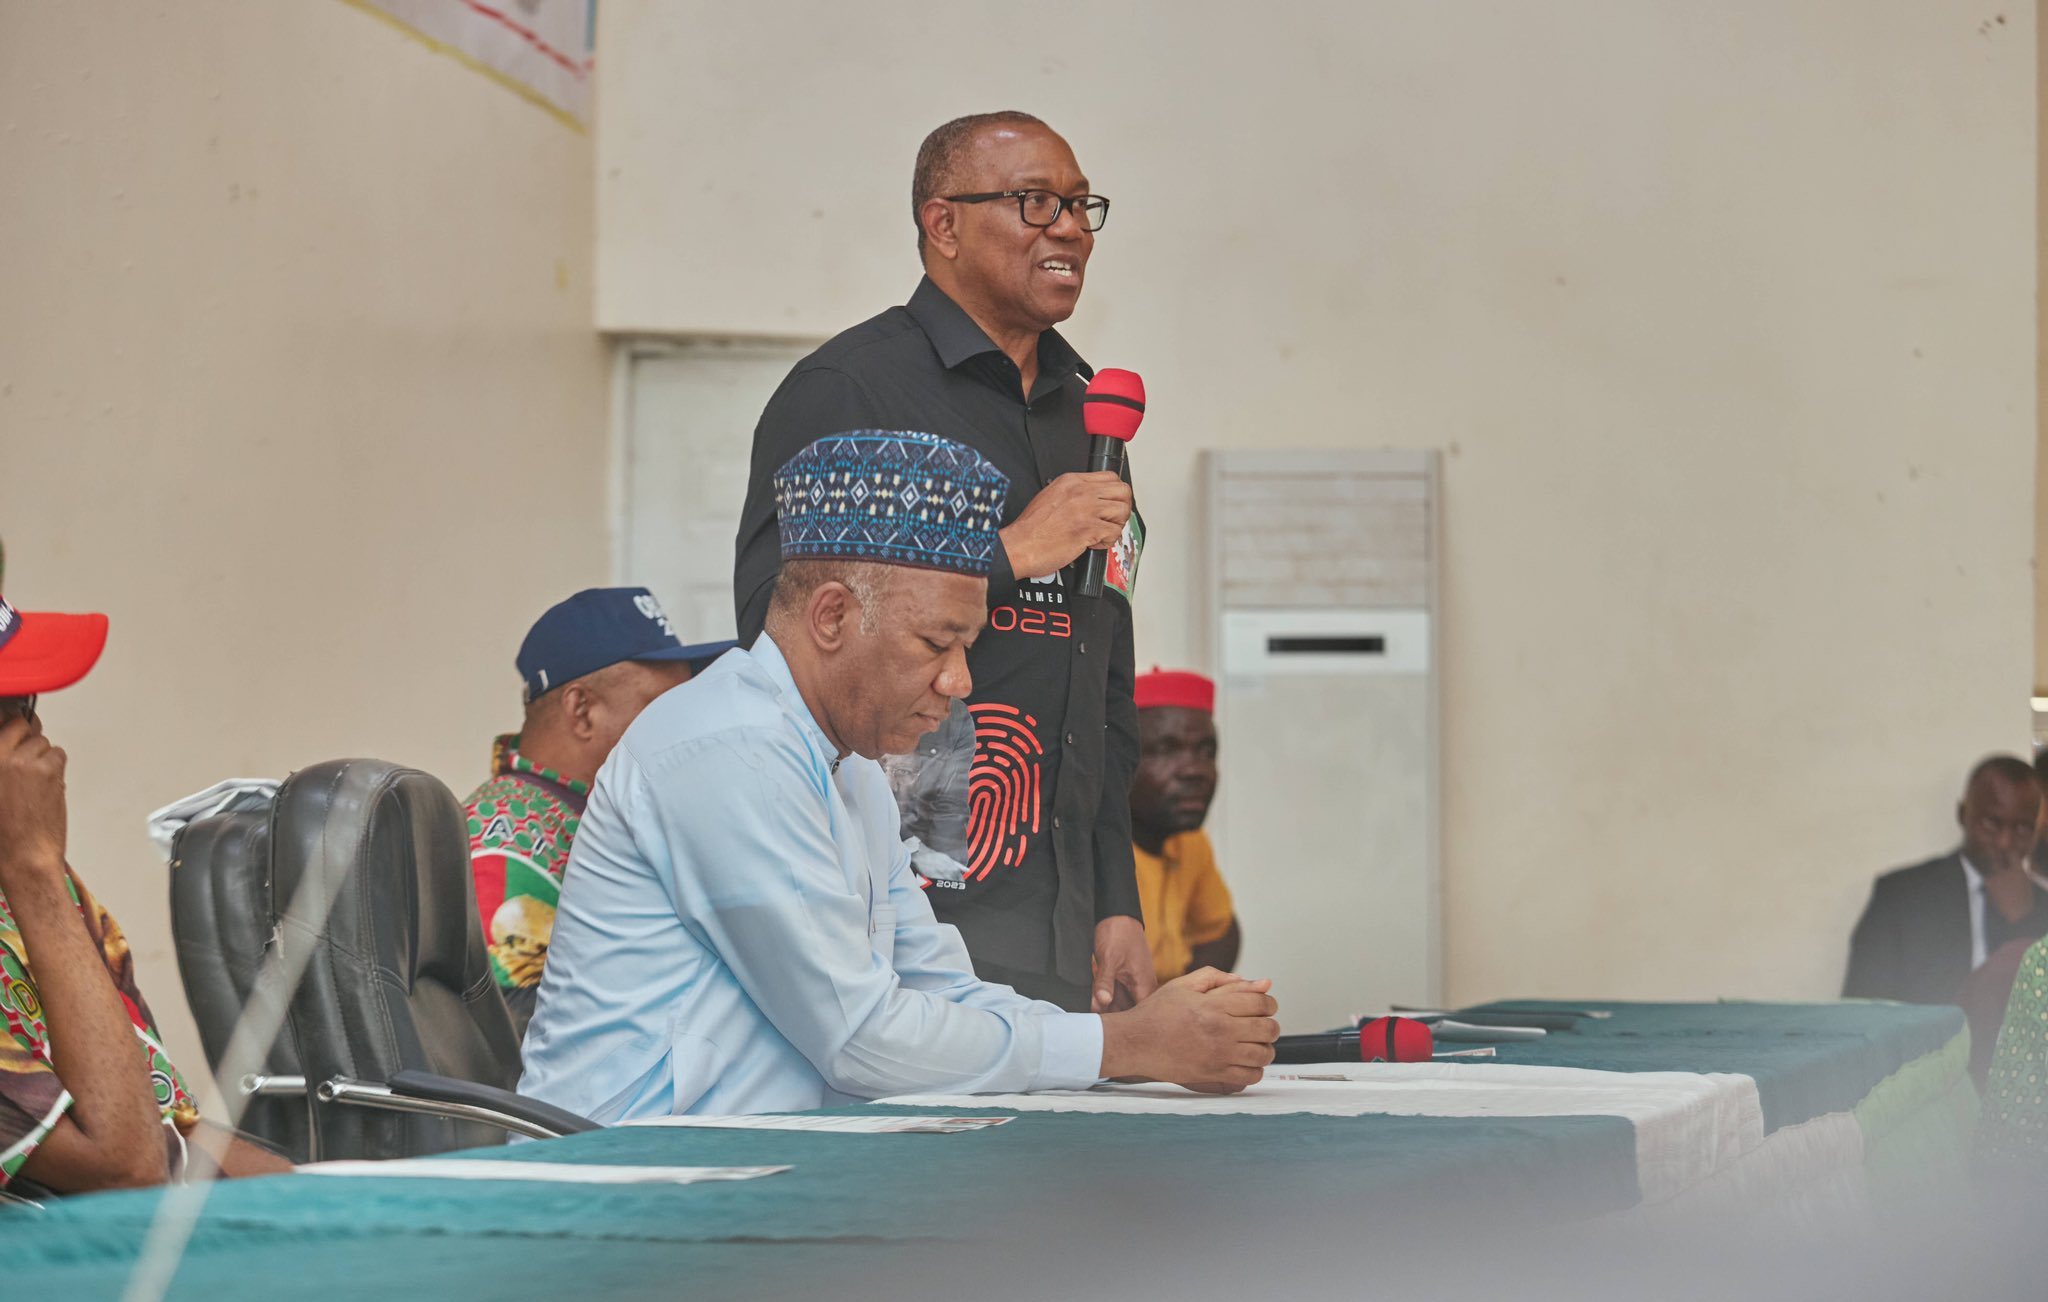 MERGER DISCUSSION: "There is no going back"- Peter Obi tells Nigerians